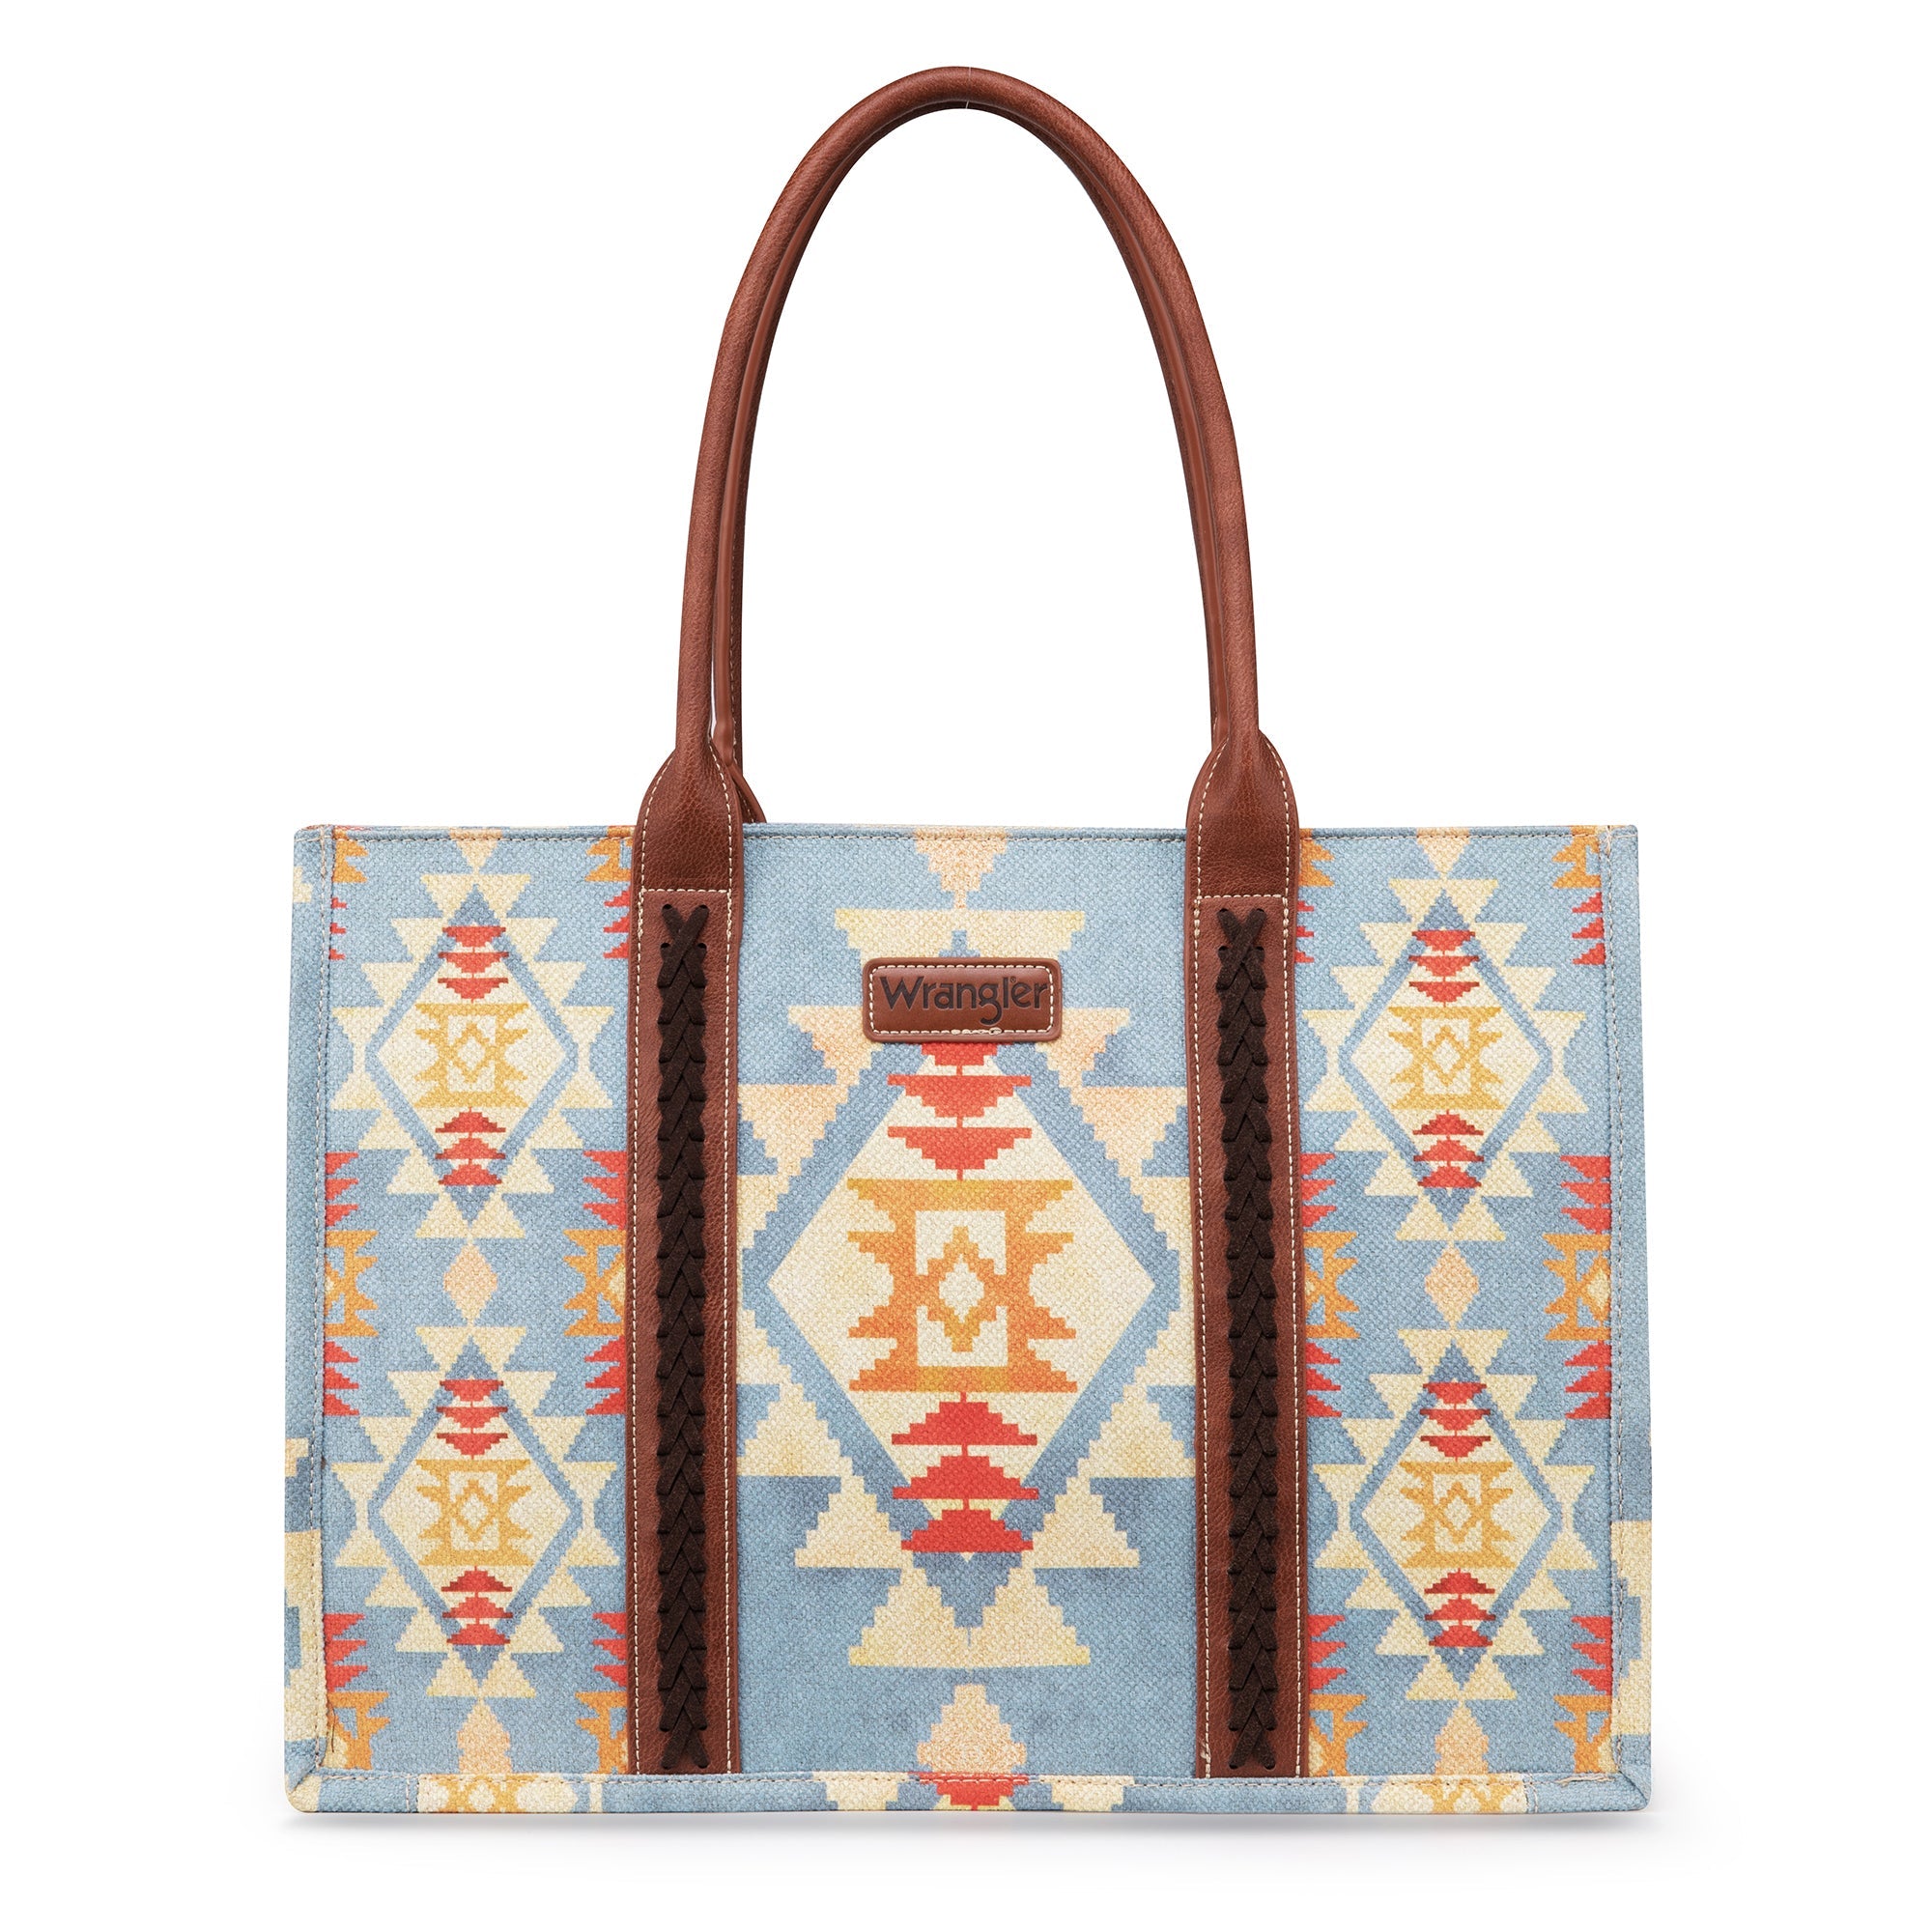 Wrangler Southwestern Dual Sided Print Canvas Tote/Crossbody Collection - Cowgirl Wear